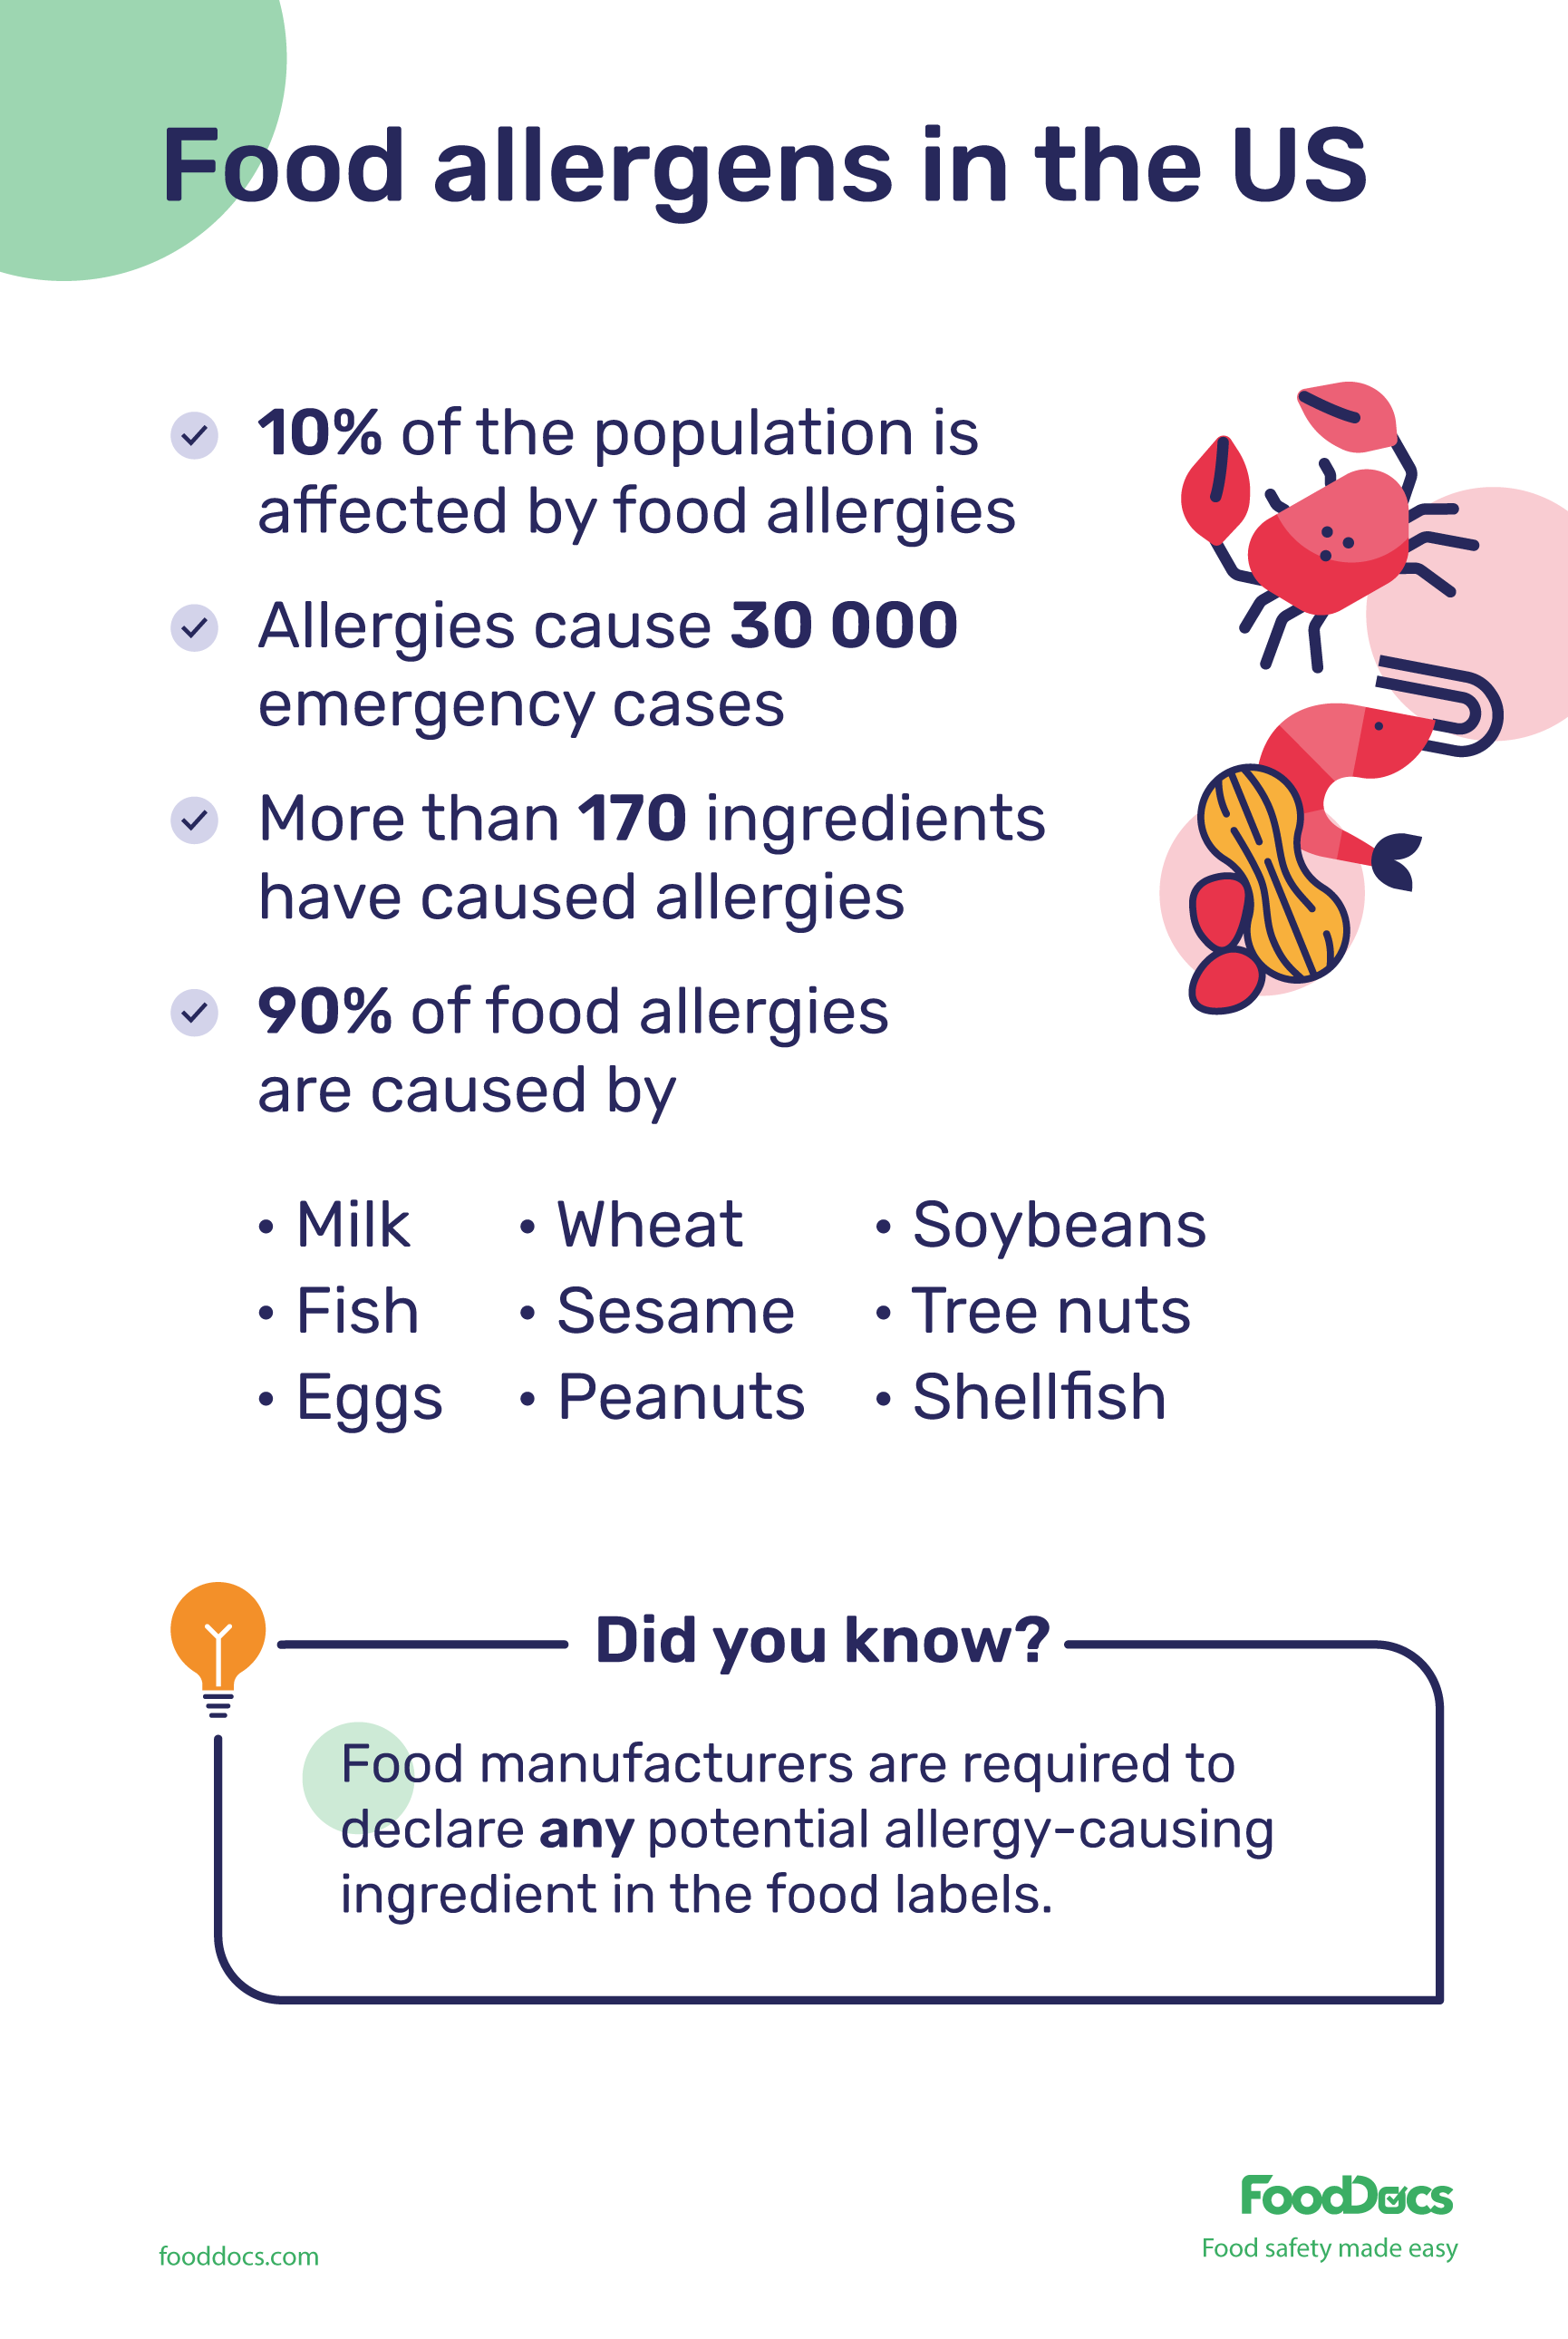 food allergens in the US